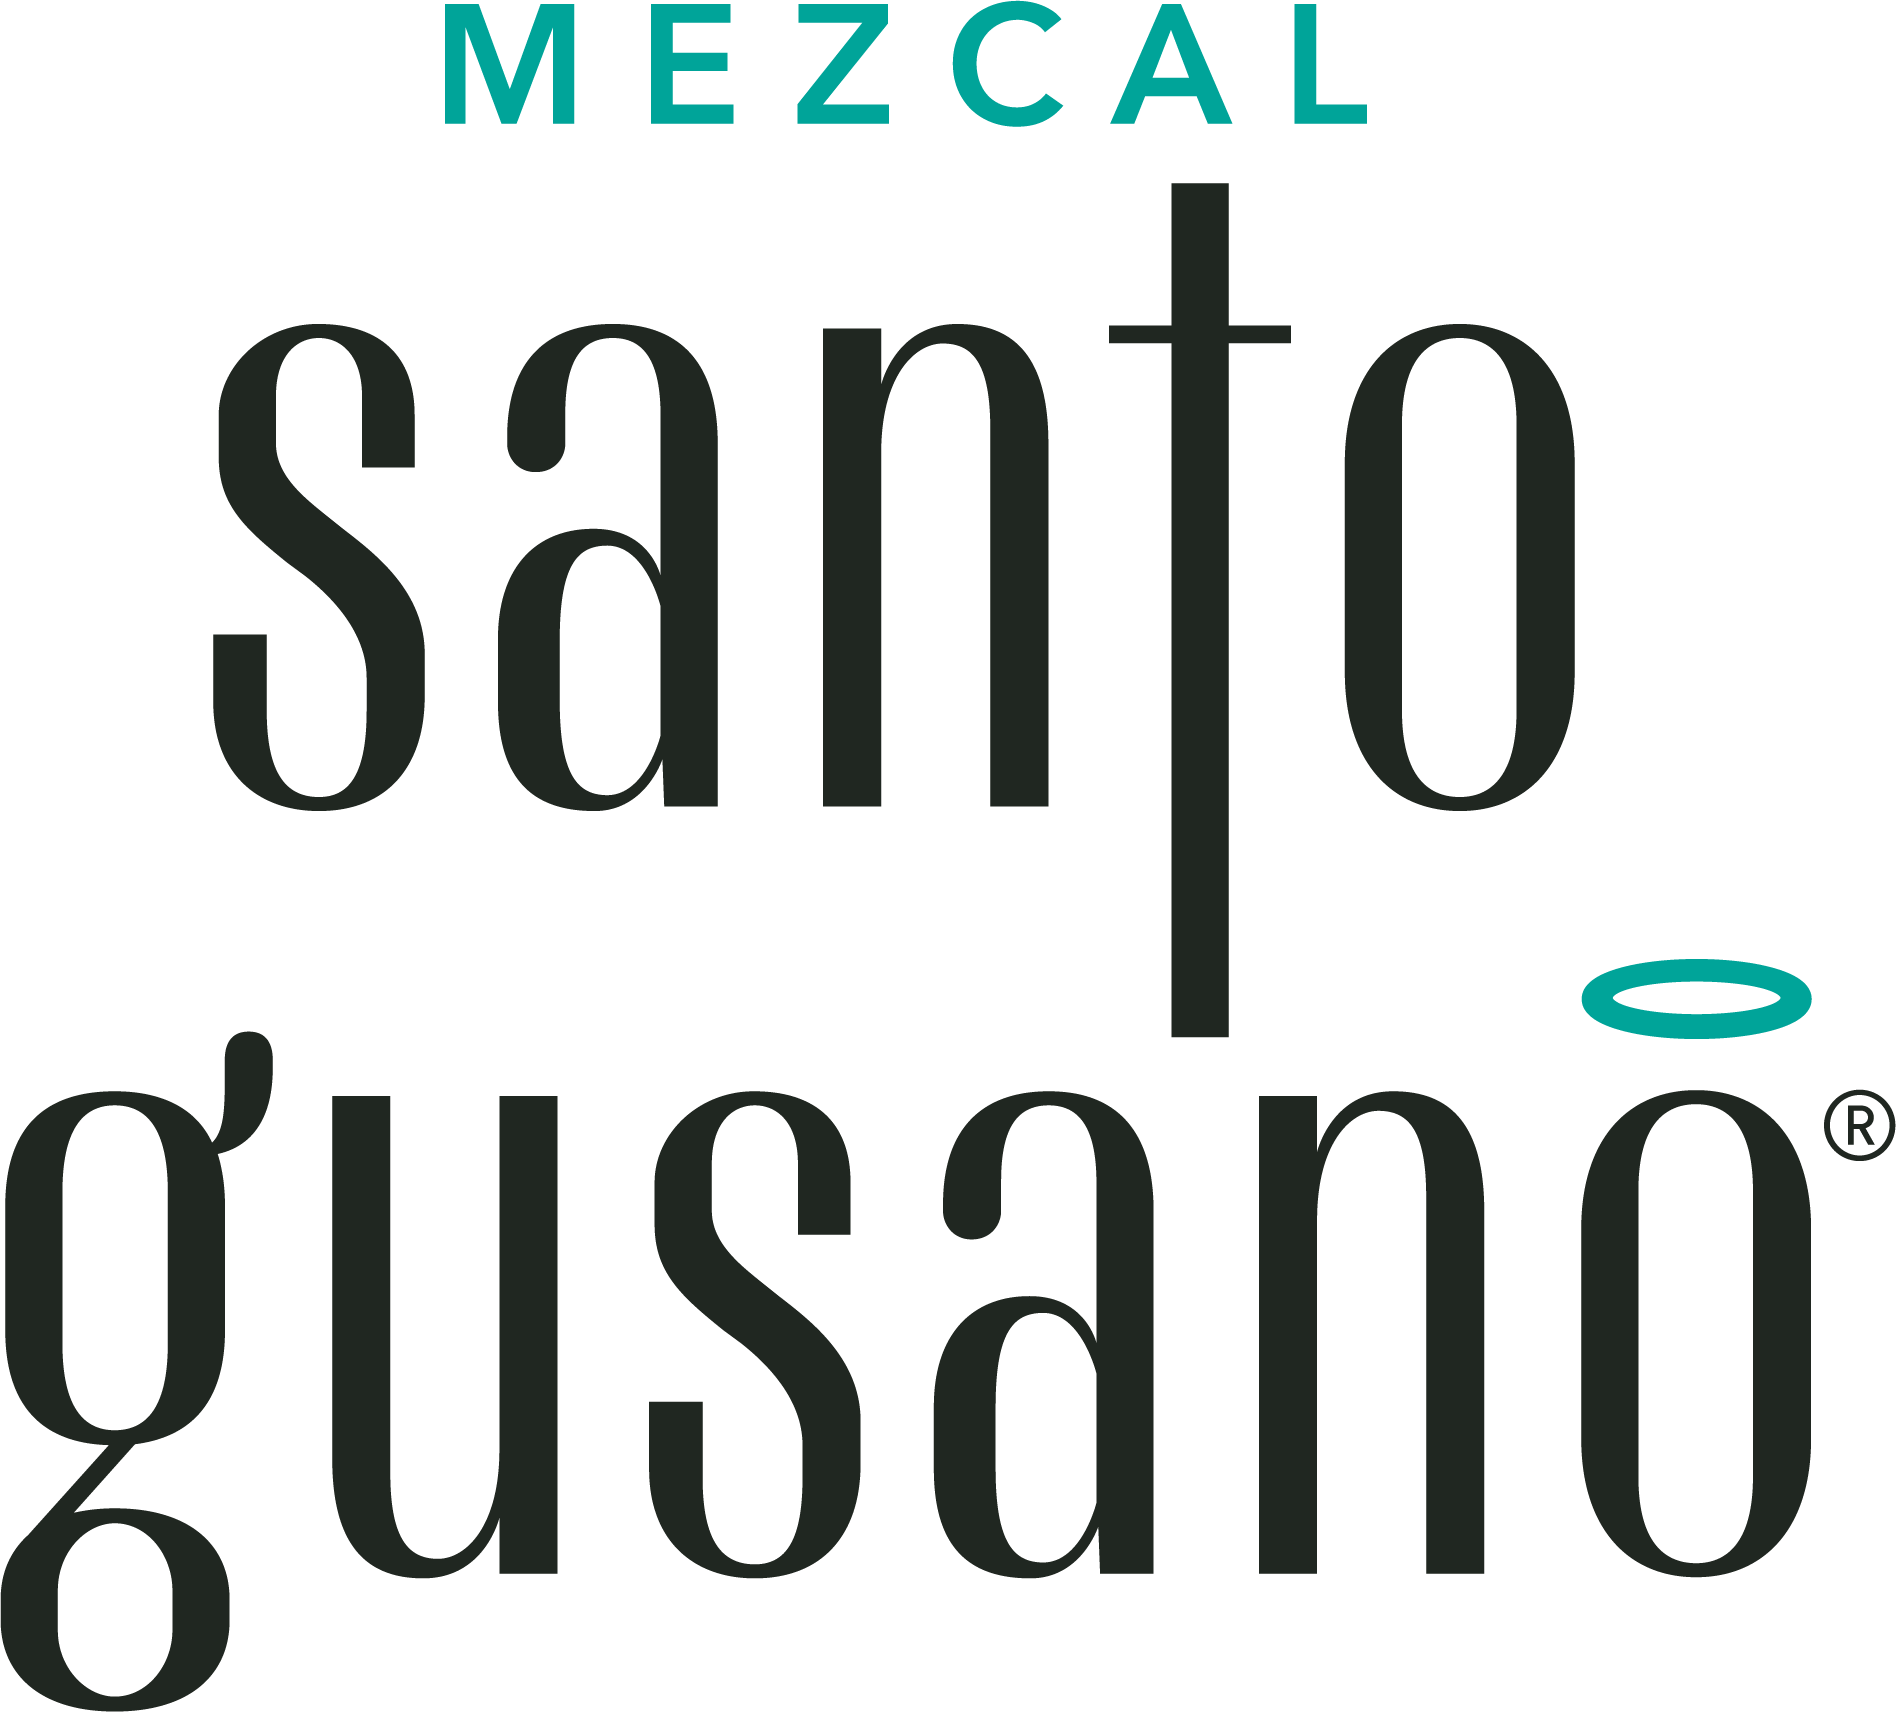 The Best Mexican mezcal, Santo Gusano, Arrives in the United States